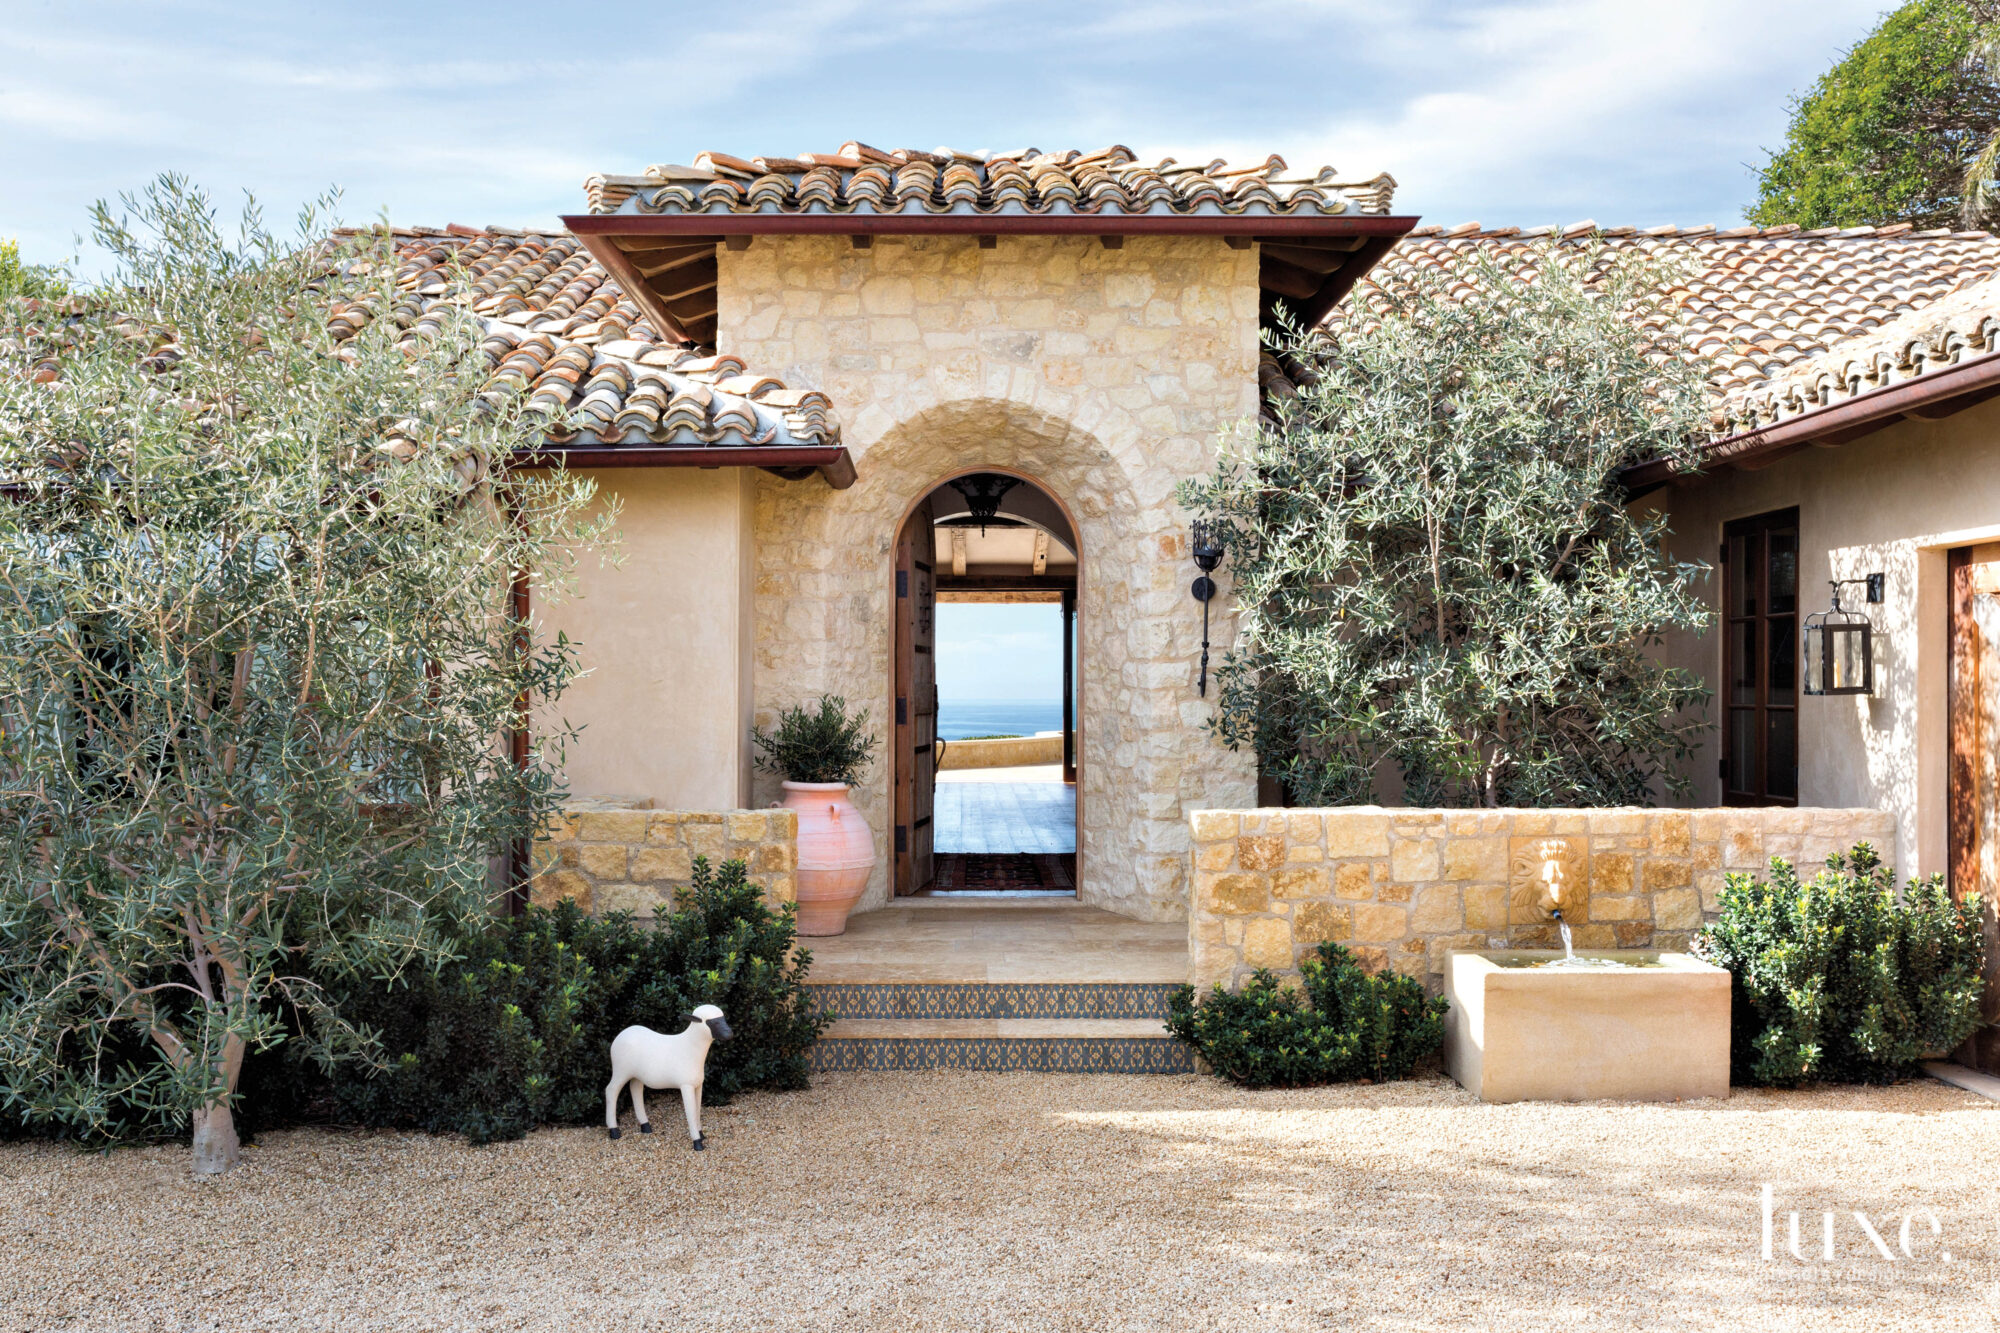 Entry to Mediterranean-style Malibu home with sheep at entrance.